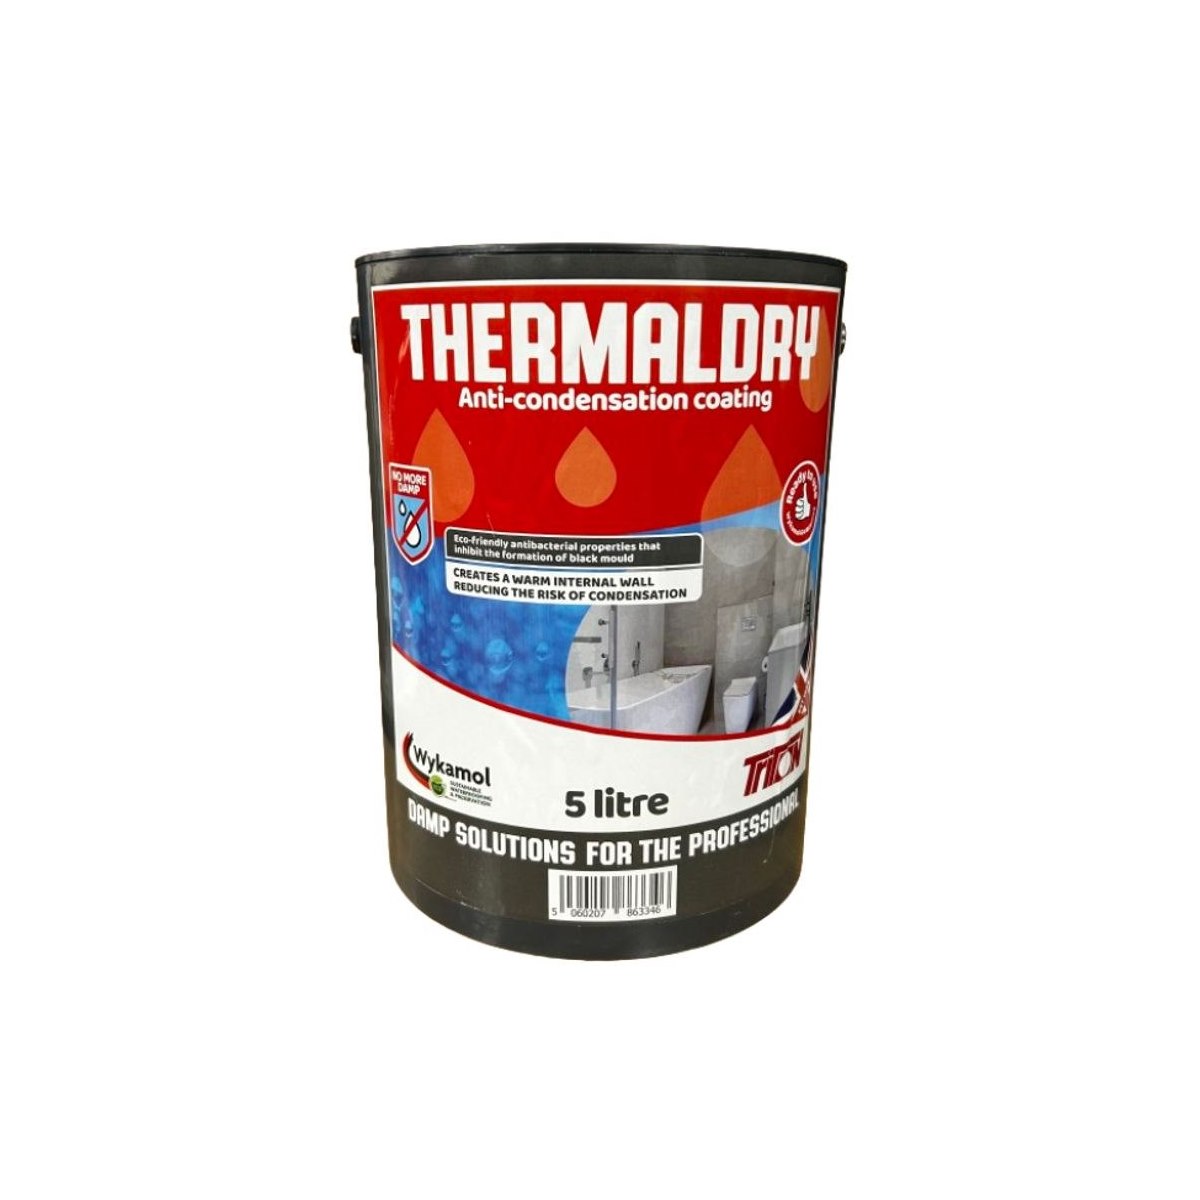 Thermal Dry Anti Condensation Coating 5L